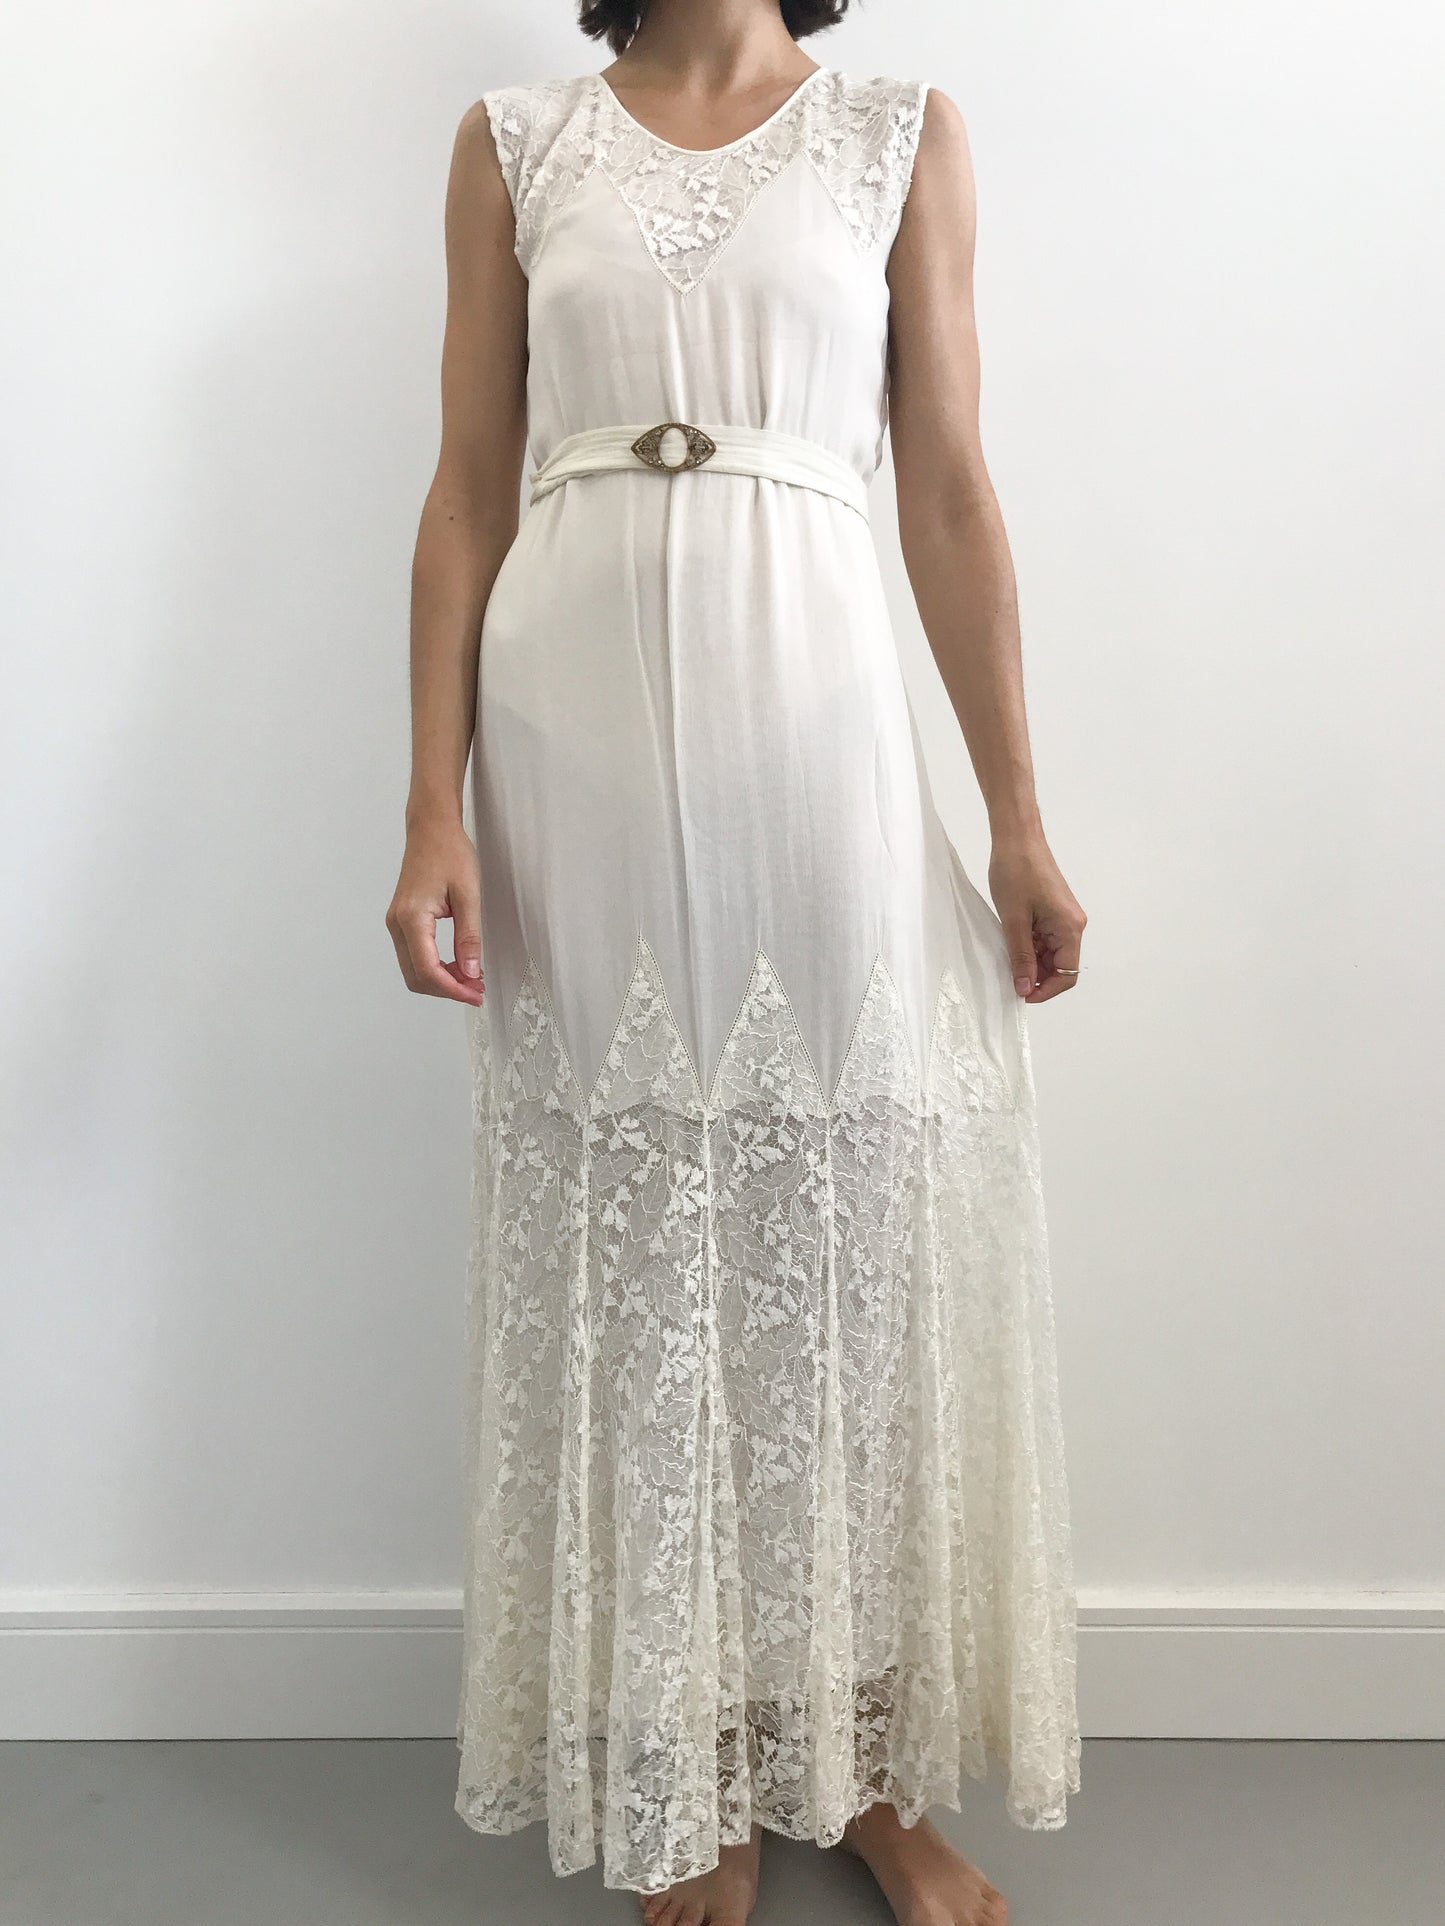 1930s Chiffon & Floral Lace Wedding Gown